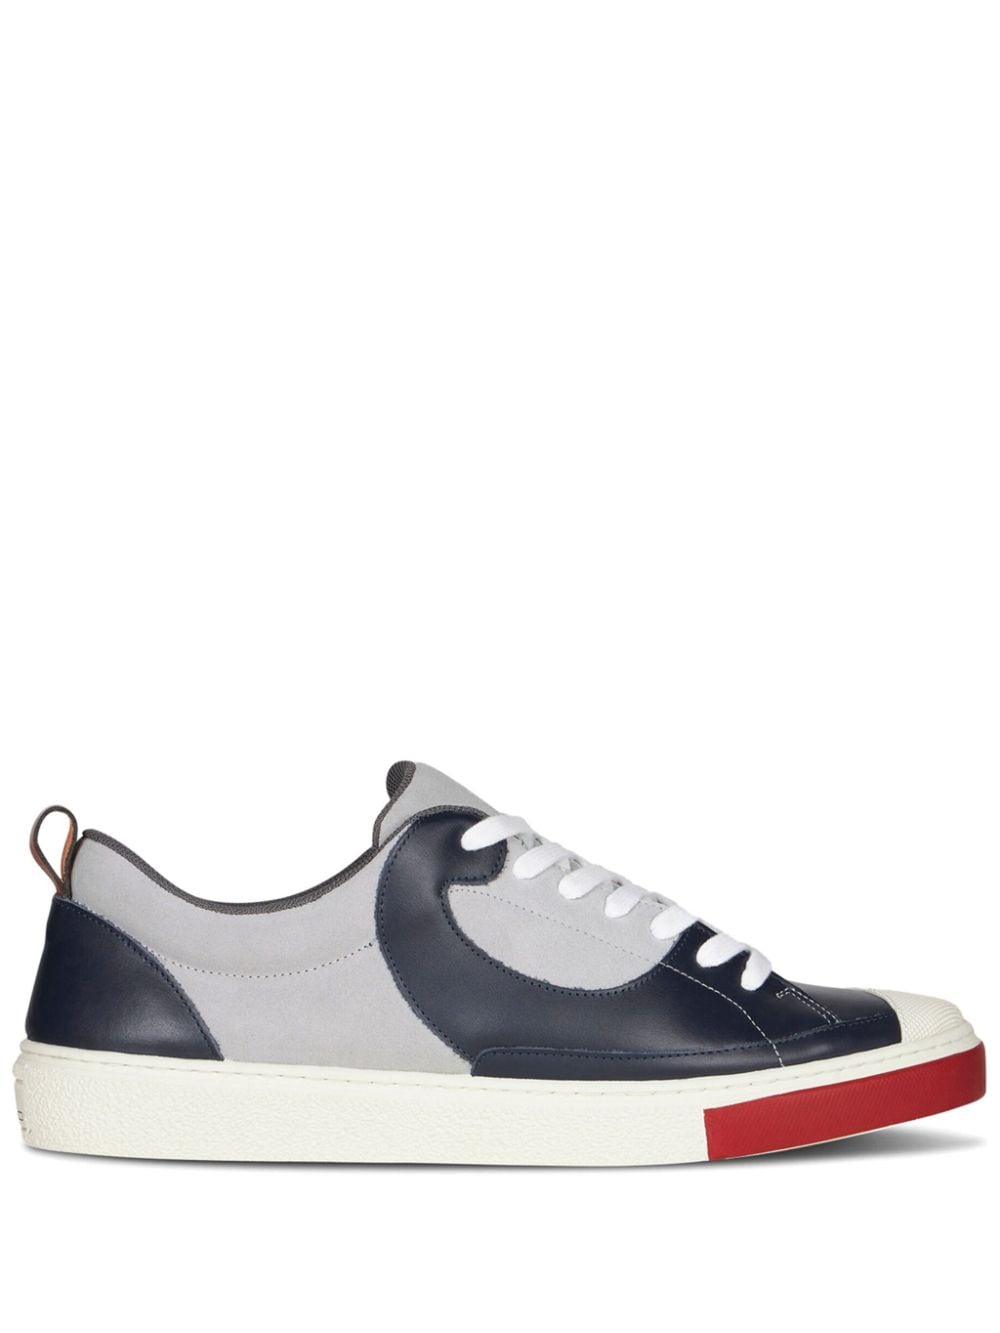 Etro Leather Slow-top Sneakers In Black